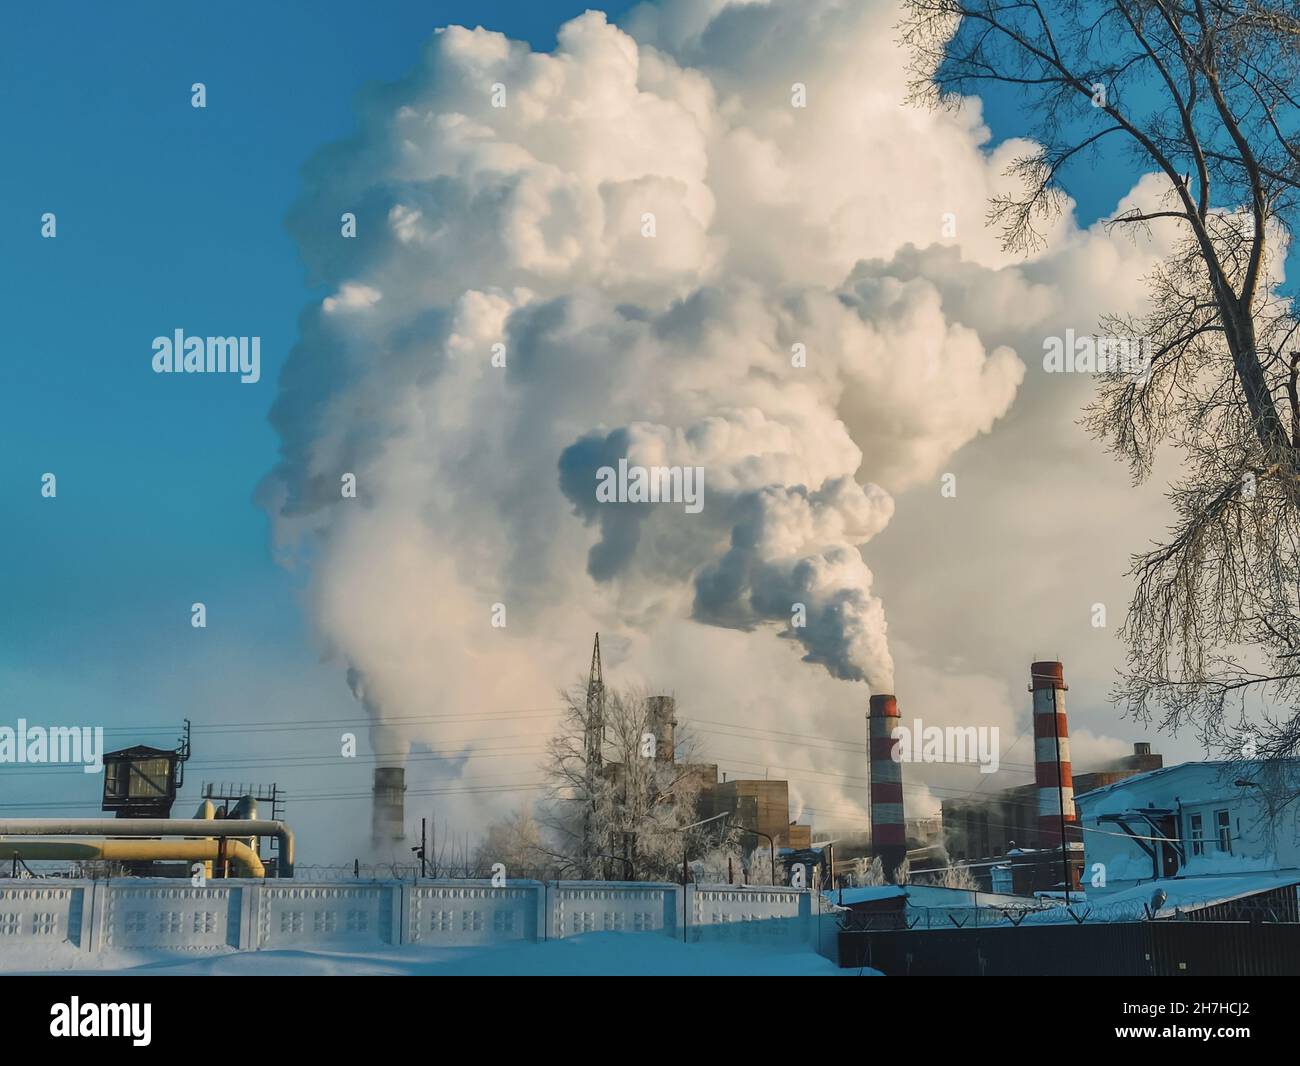 Chimney emissions from industrial lignite power plants. Huge clouds of smoke from chimneys, pipes of a thermal power plant, polluting the atmosphere Stock Photo